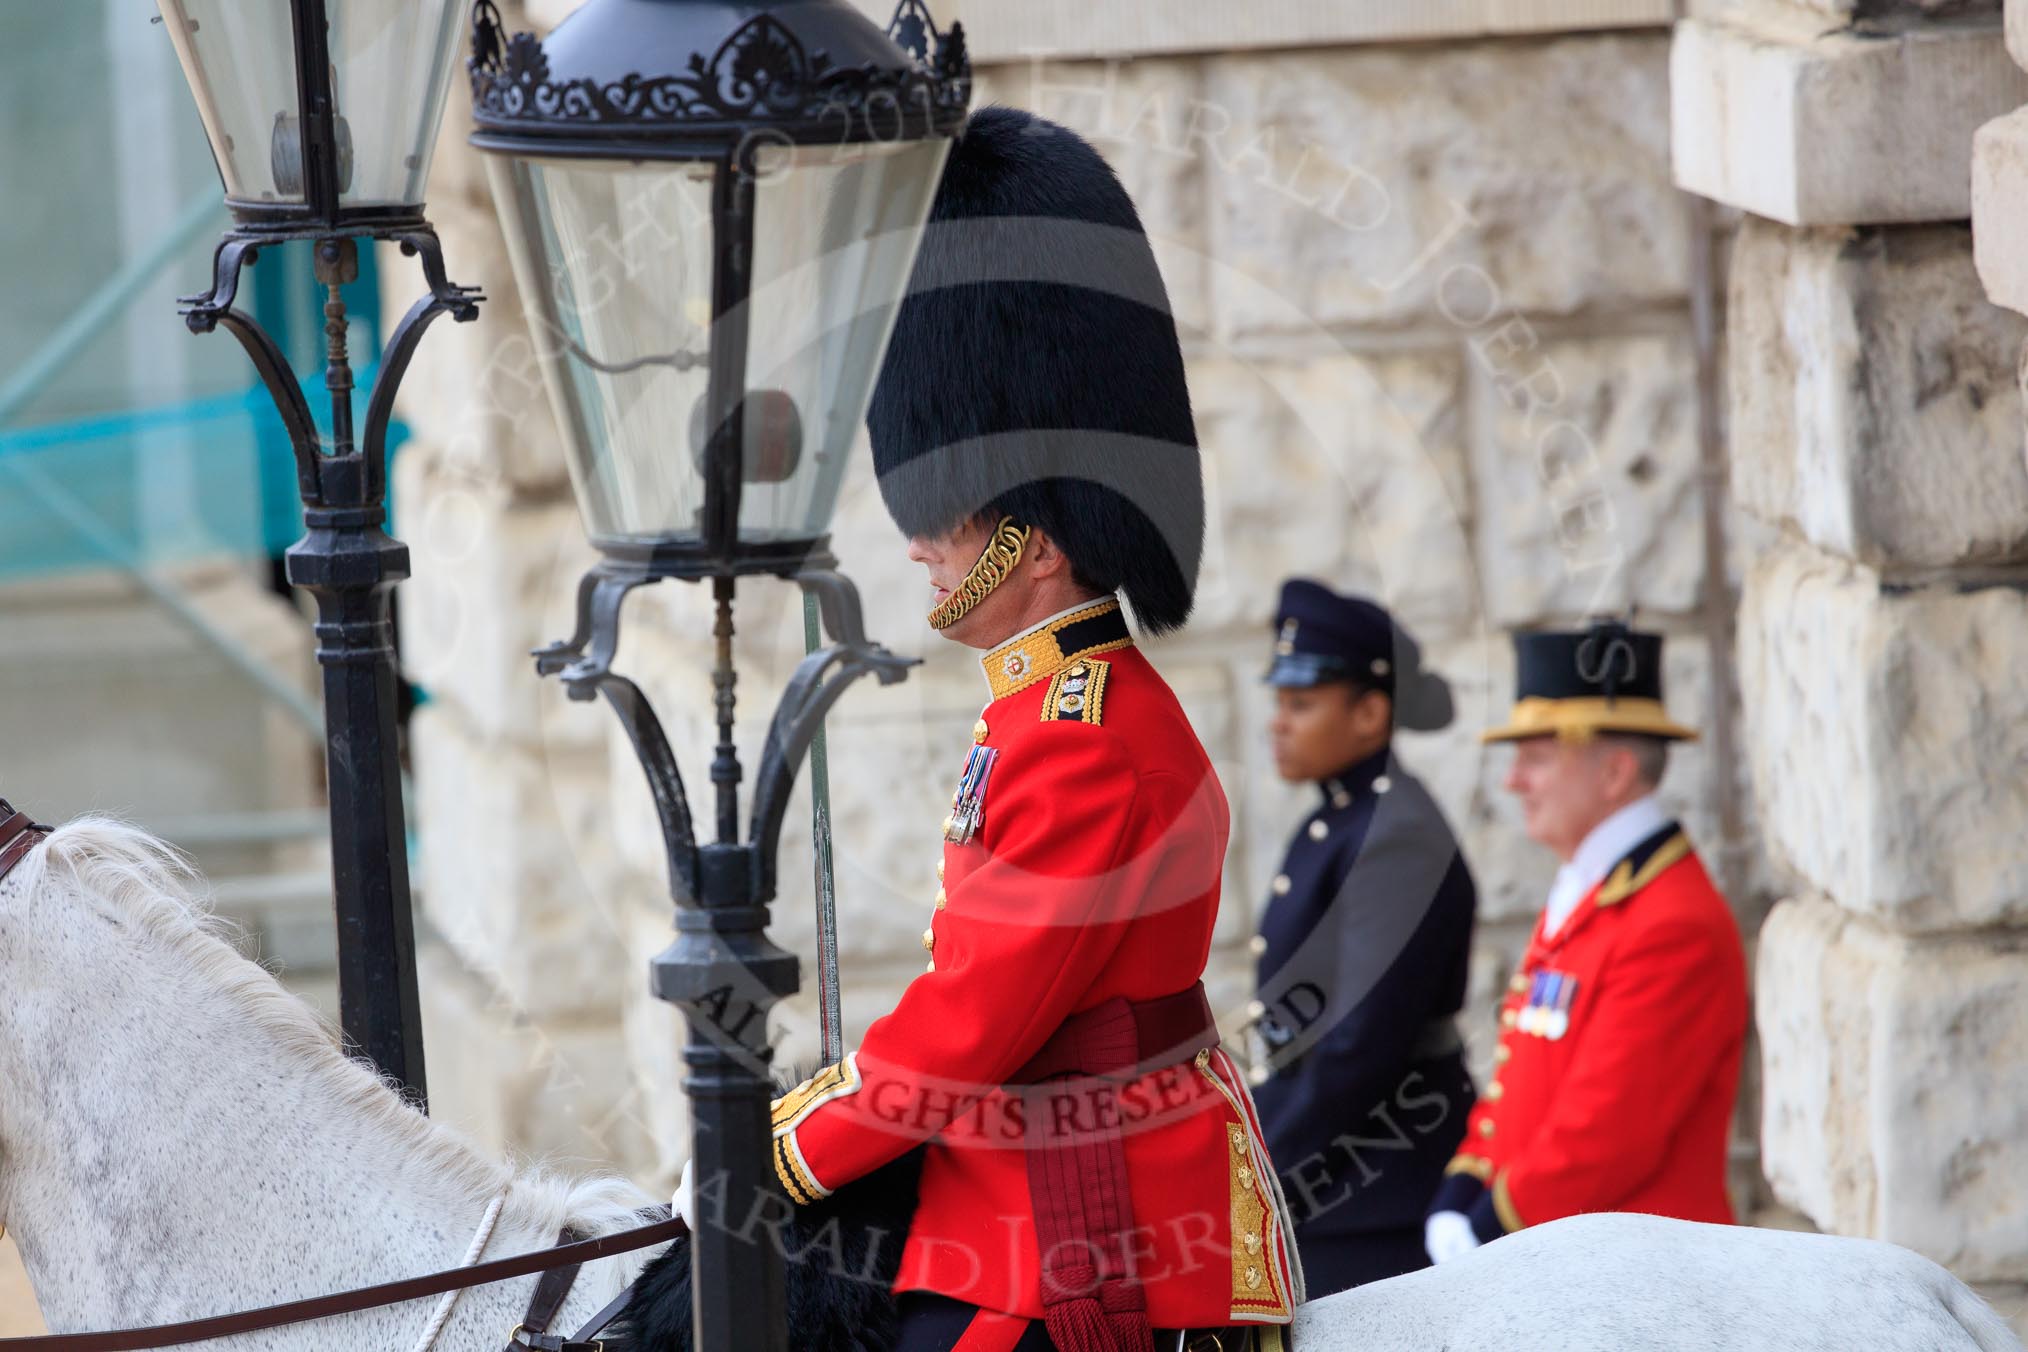 during The Colonel's Review {iptcyear4} (final rehearsal for Trooping the Colour, The Queen's Birthday Parade)  at Horse Guards Parade, Westminster, London, 2 June 2018, 10:41.